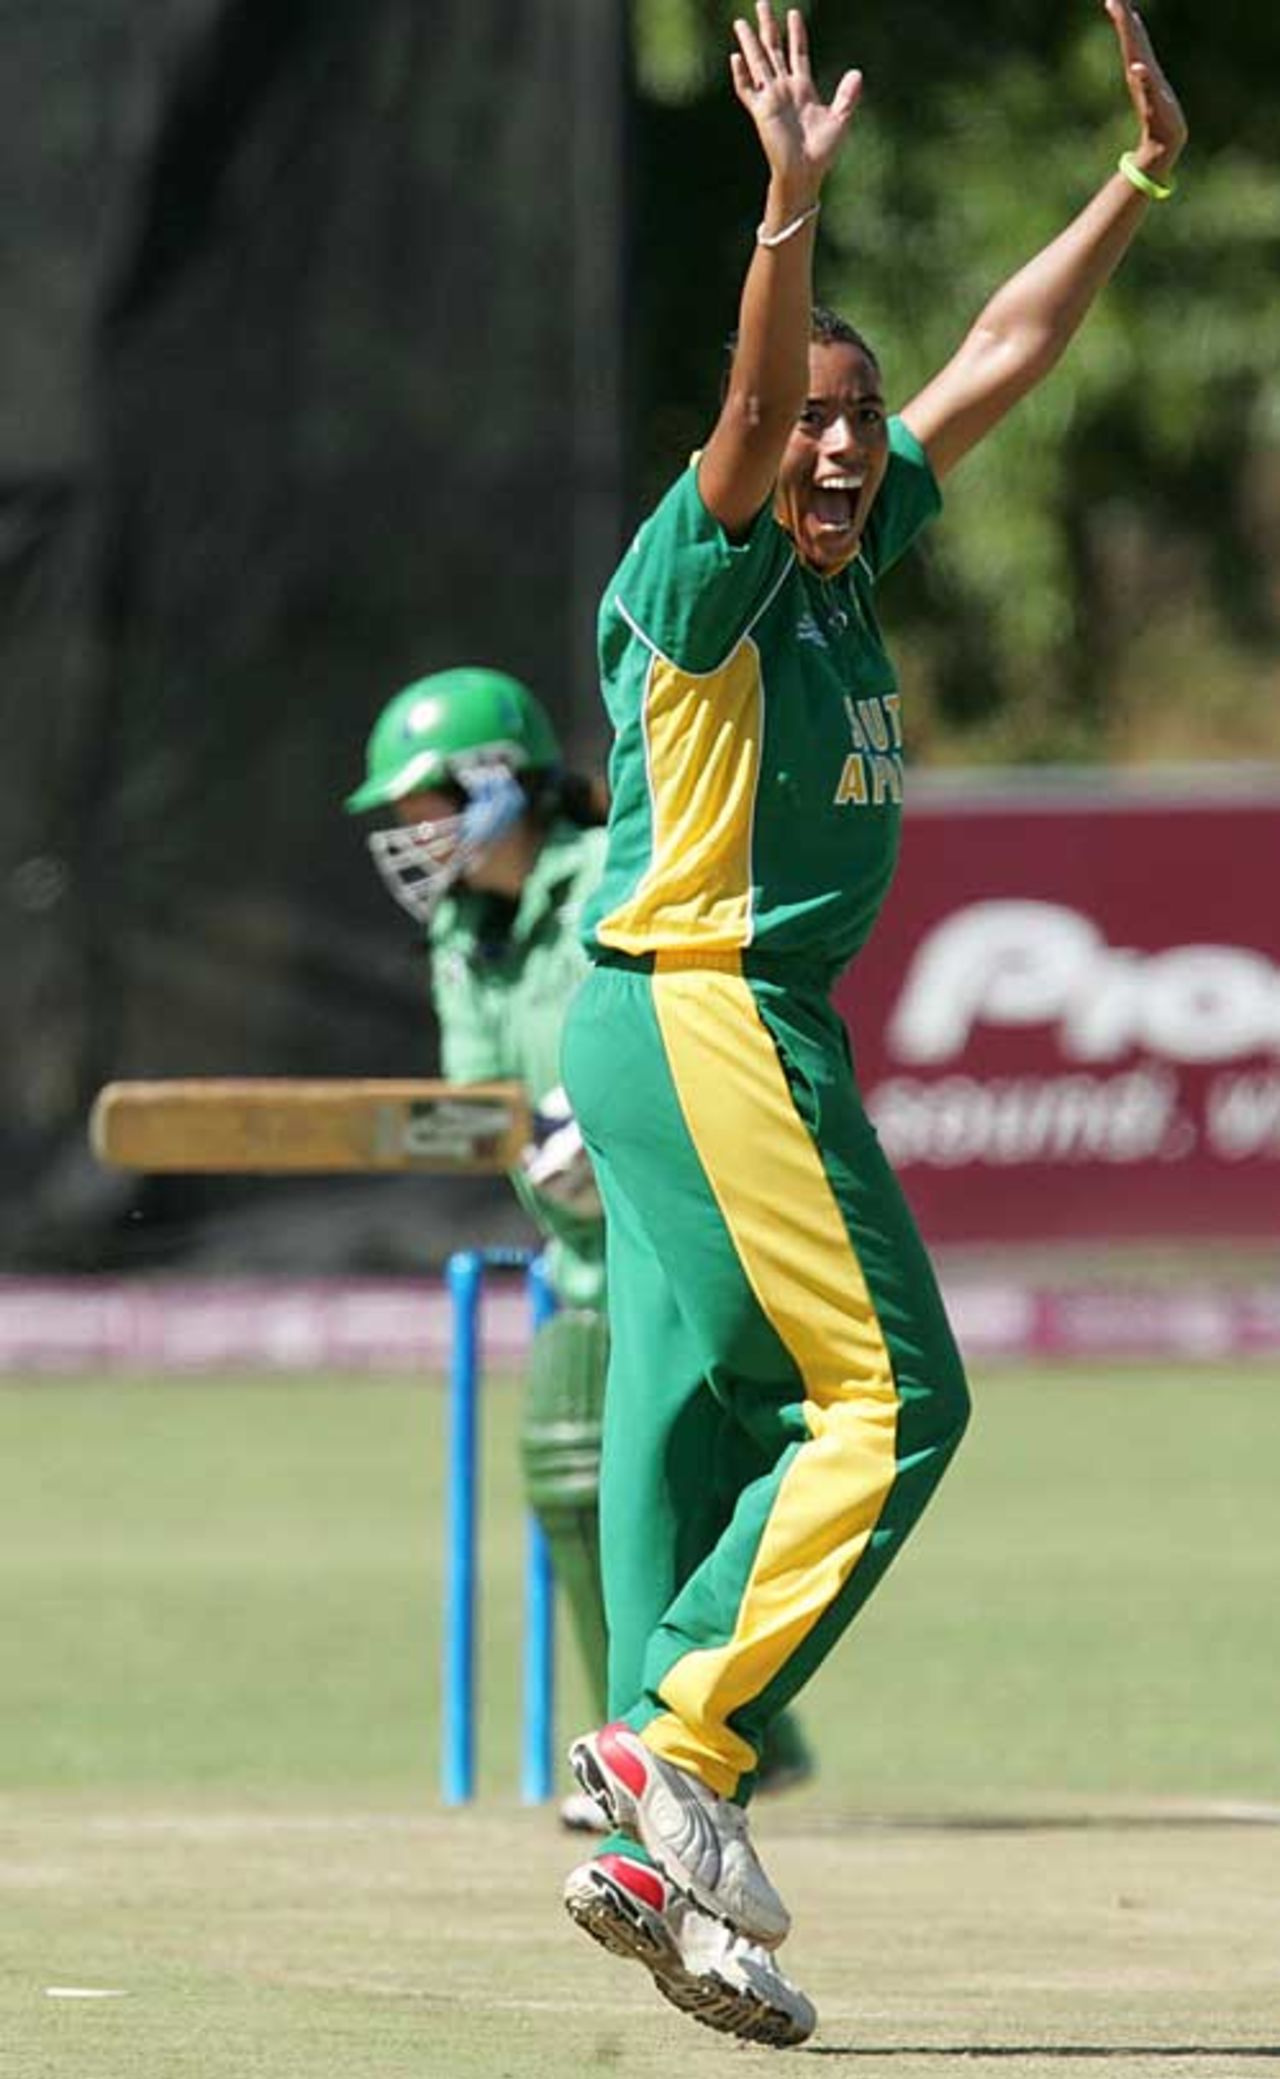 Alicia Smith roars an appeal against Ireland, South Africa v Ireland, ICC Women's World Cup Qualifiers, Stellenbosch, February 22, 2008